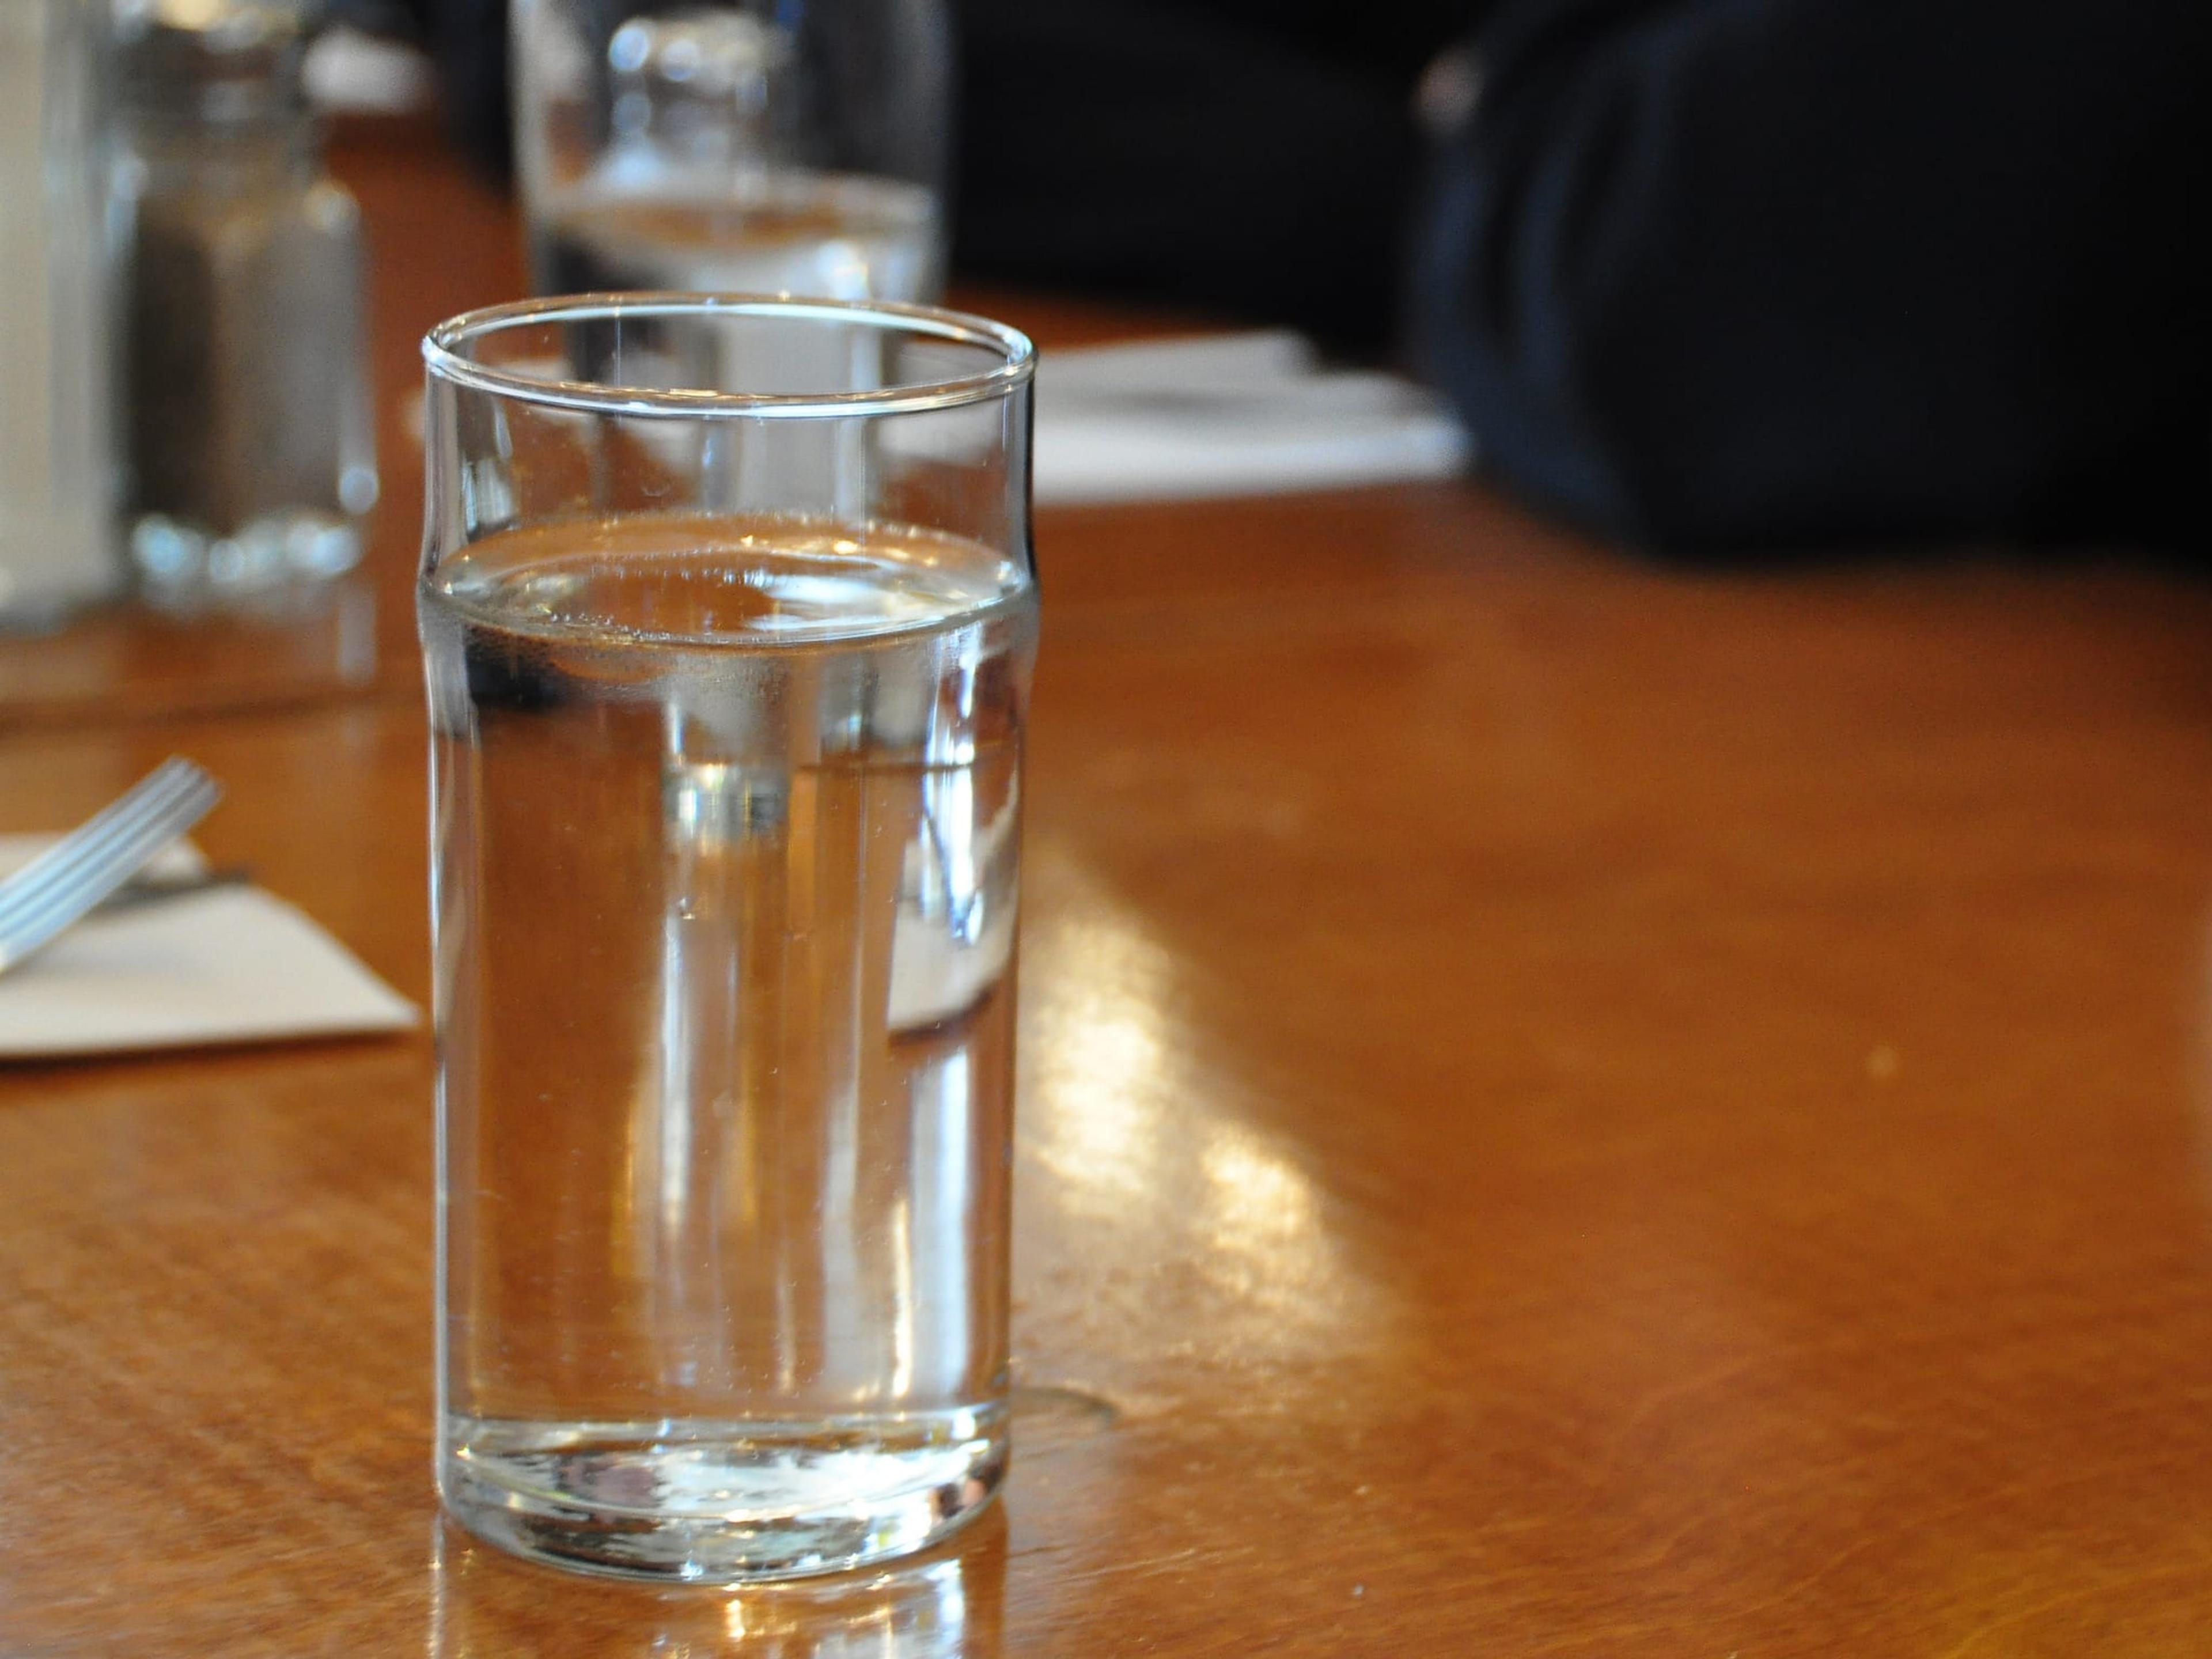 Glasses of drinking water on a table.